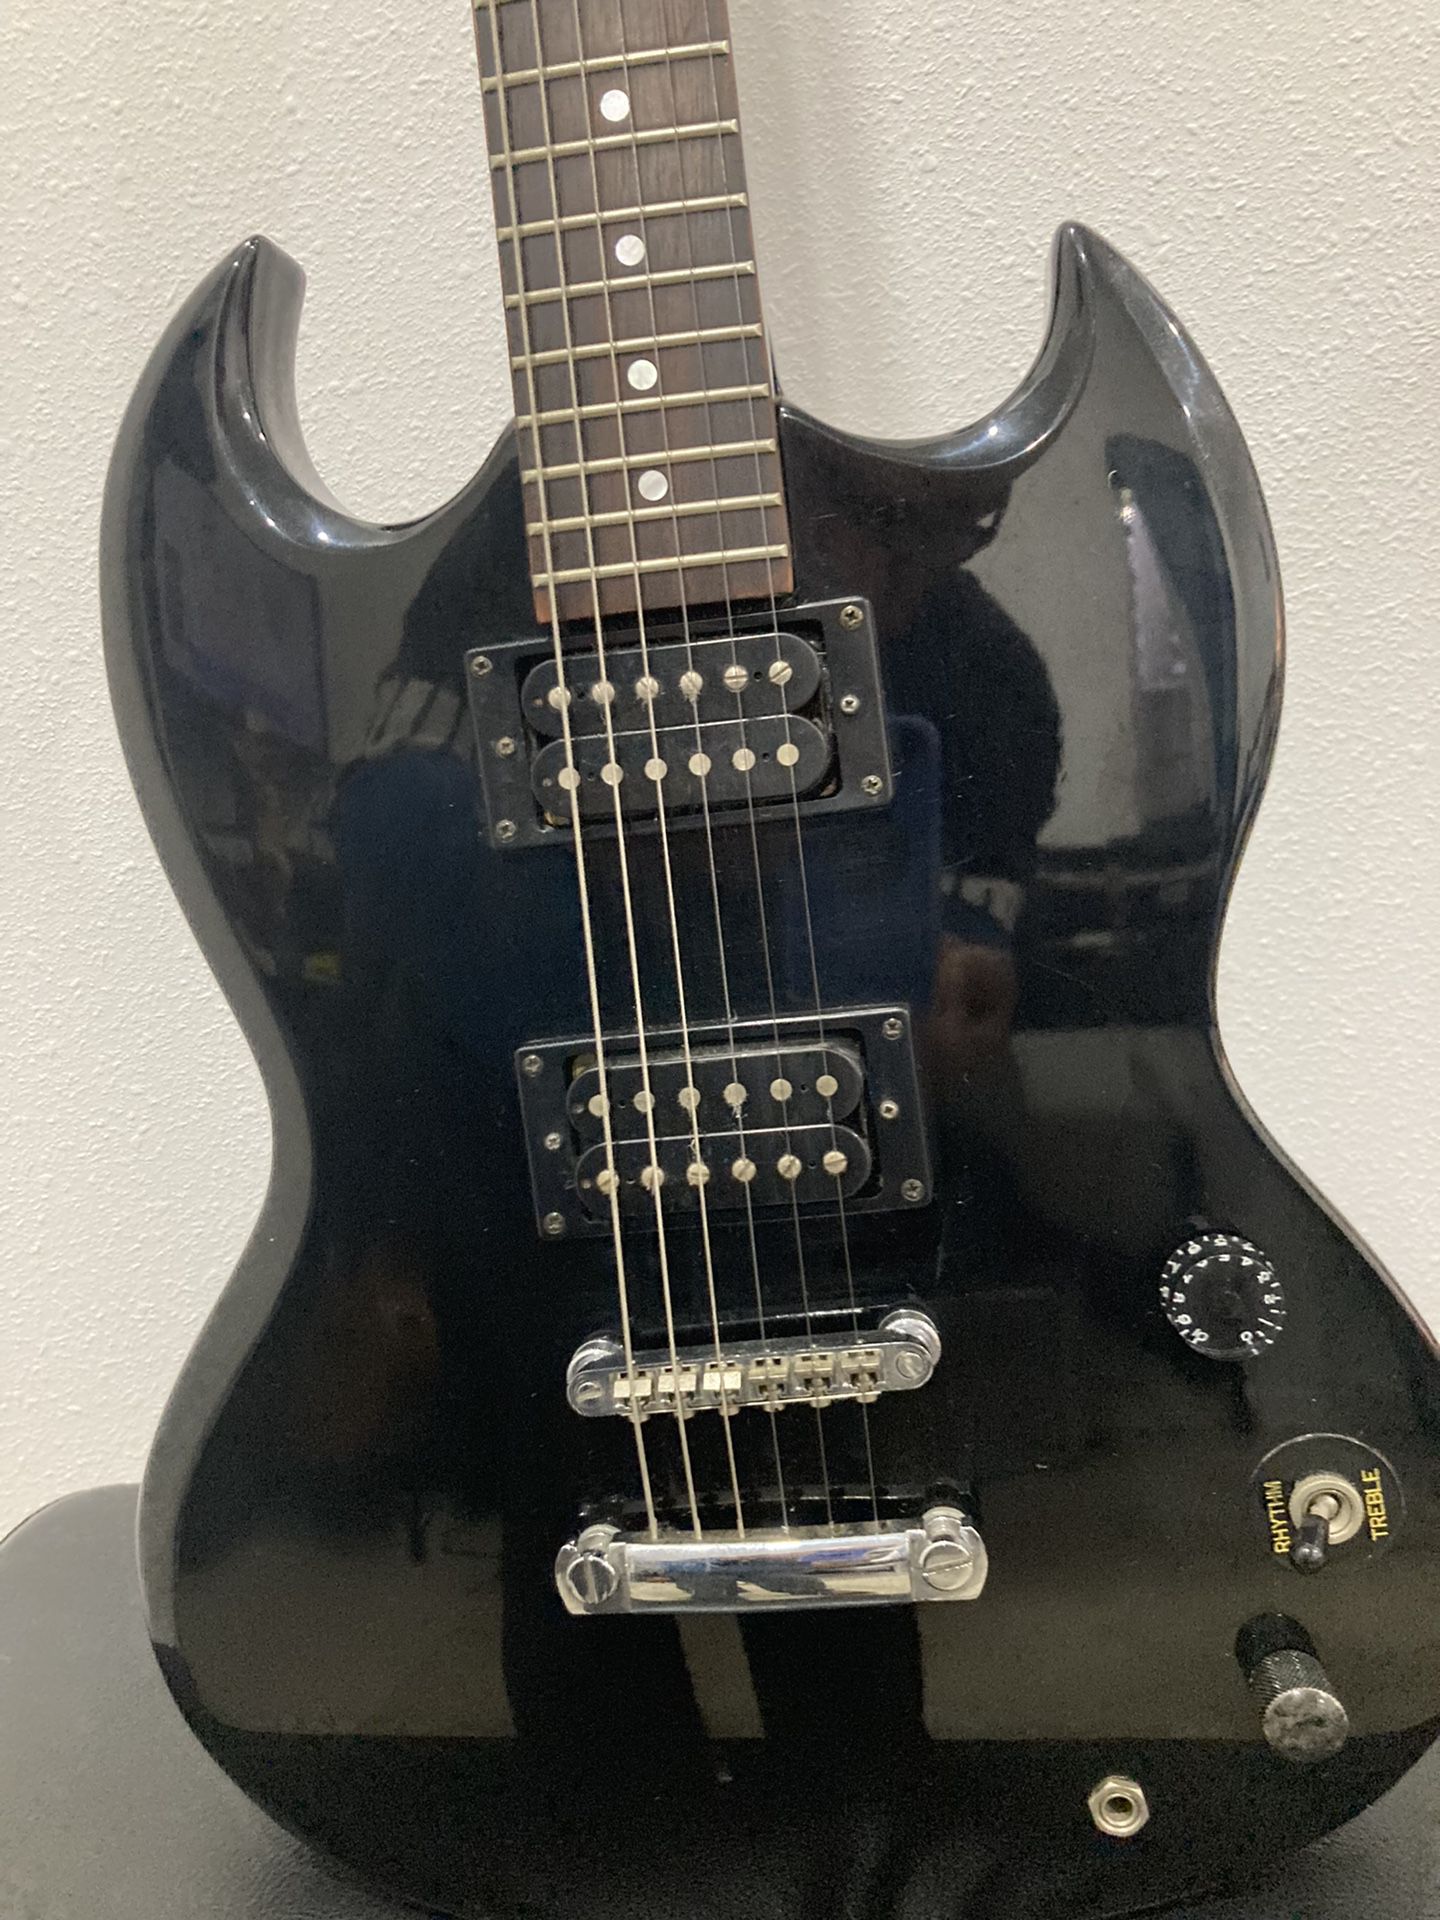 Epiphone  SG Special Electric Guitar $99 Firm